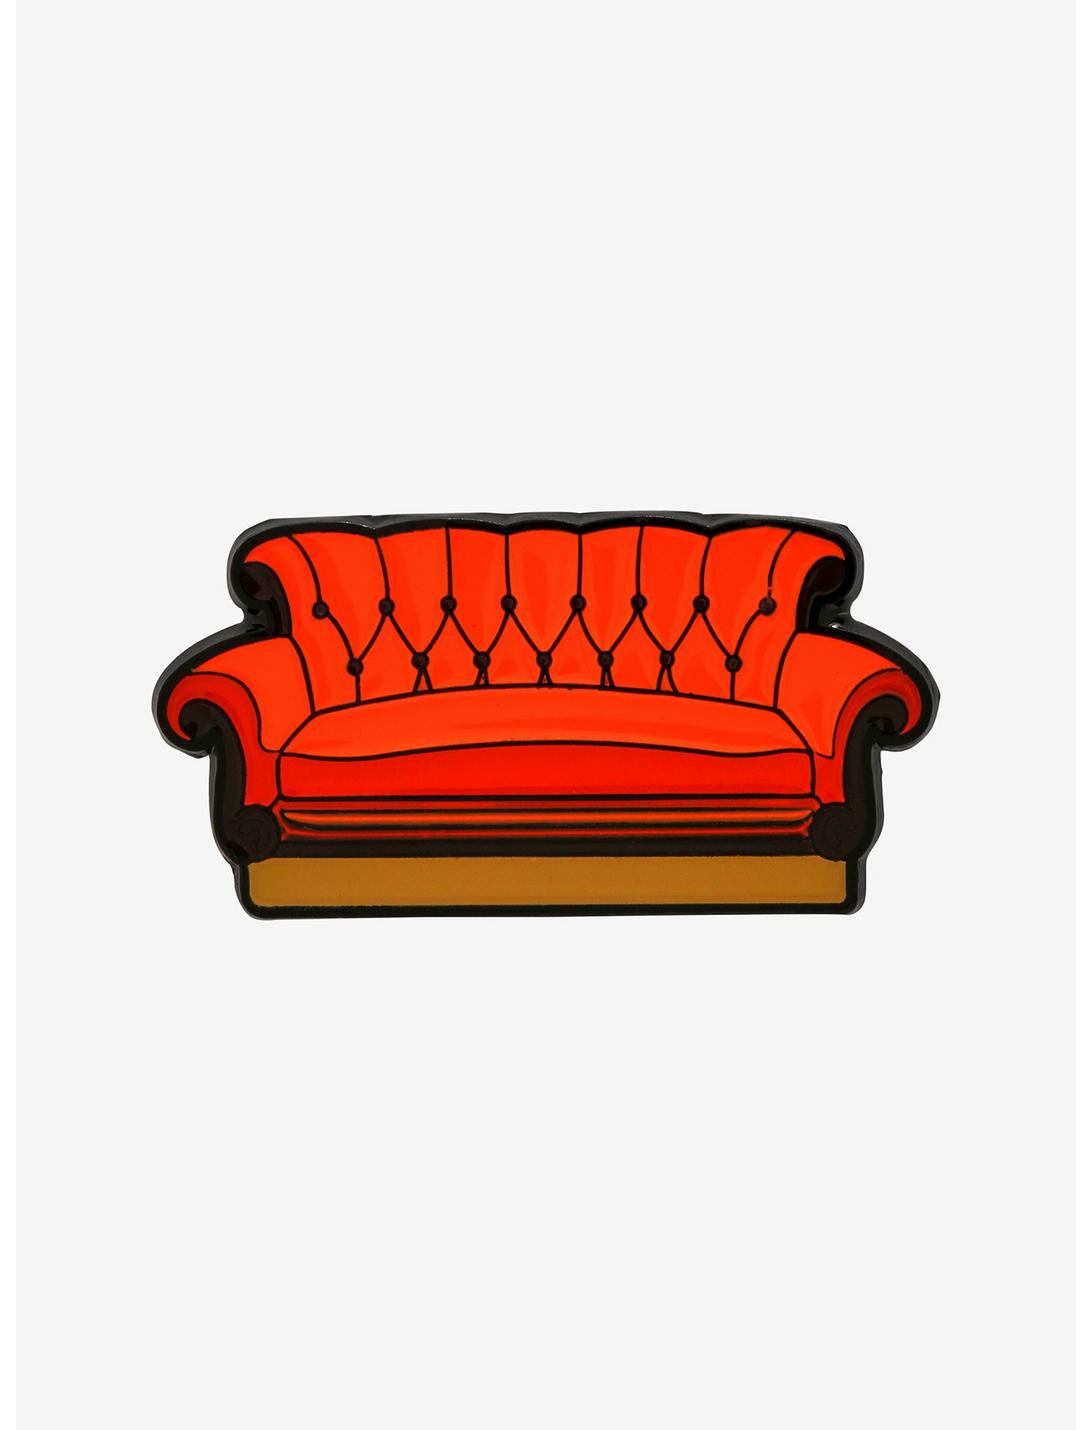 Friends Central Perk Couch Enamel Pin - BoxLunch Exclusive, , hi-res